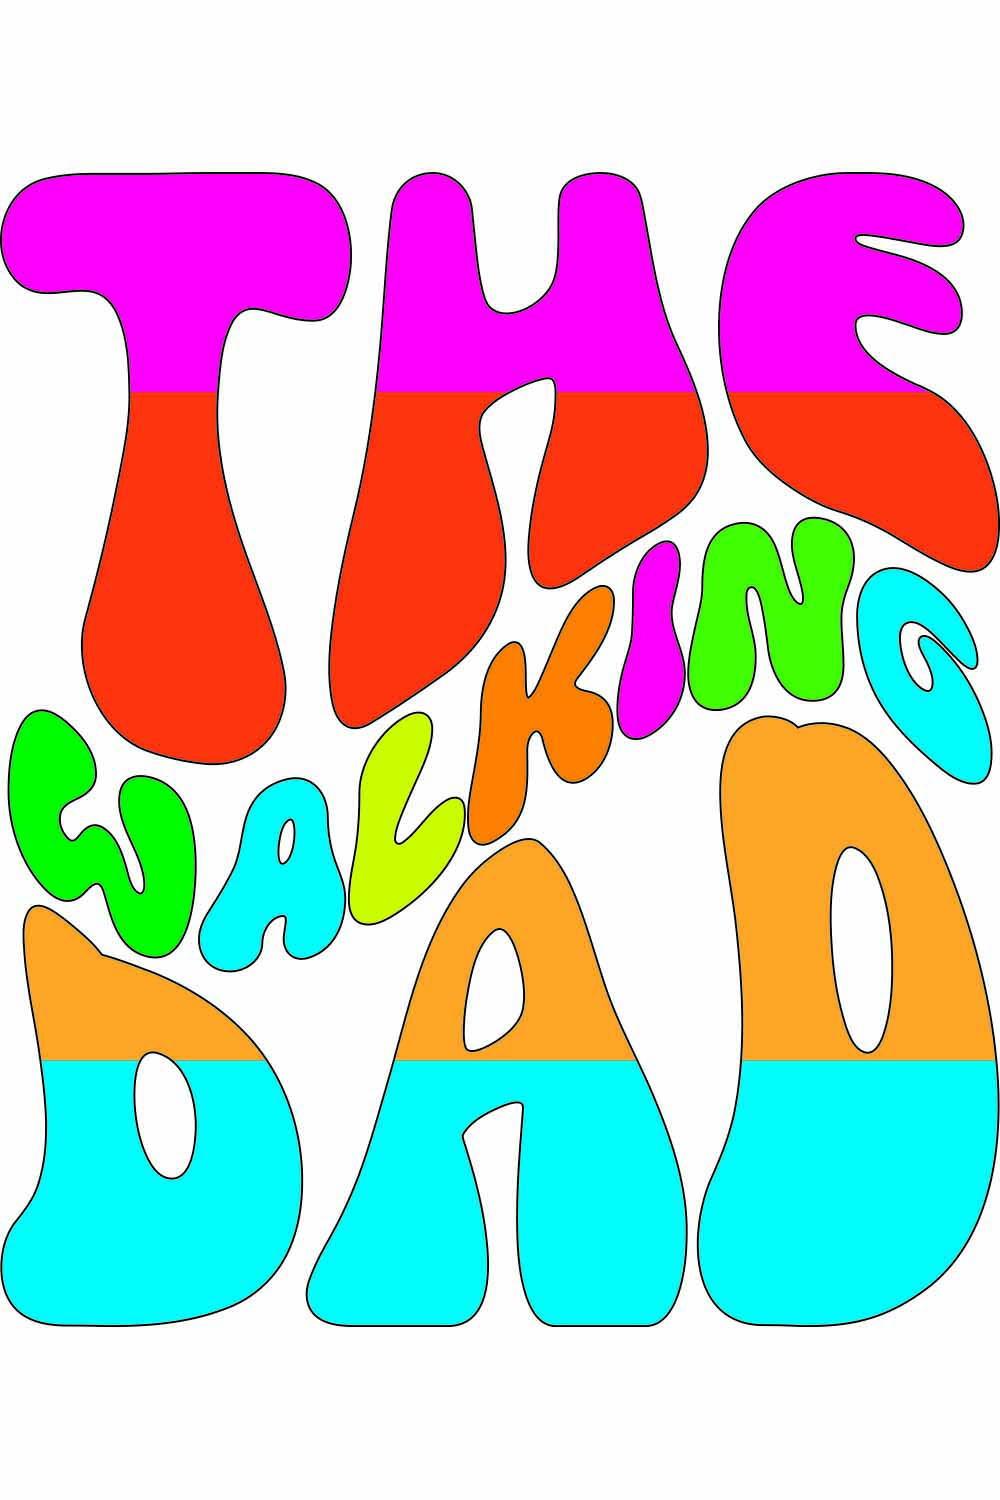 The Walking Dad retro t-shirt Designs pinterest preview image.